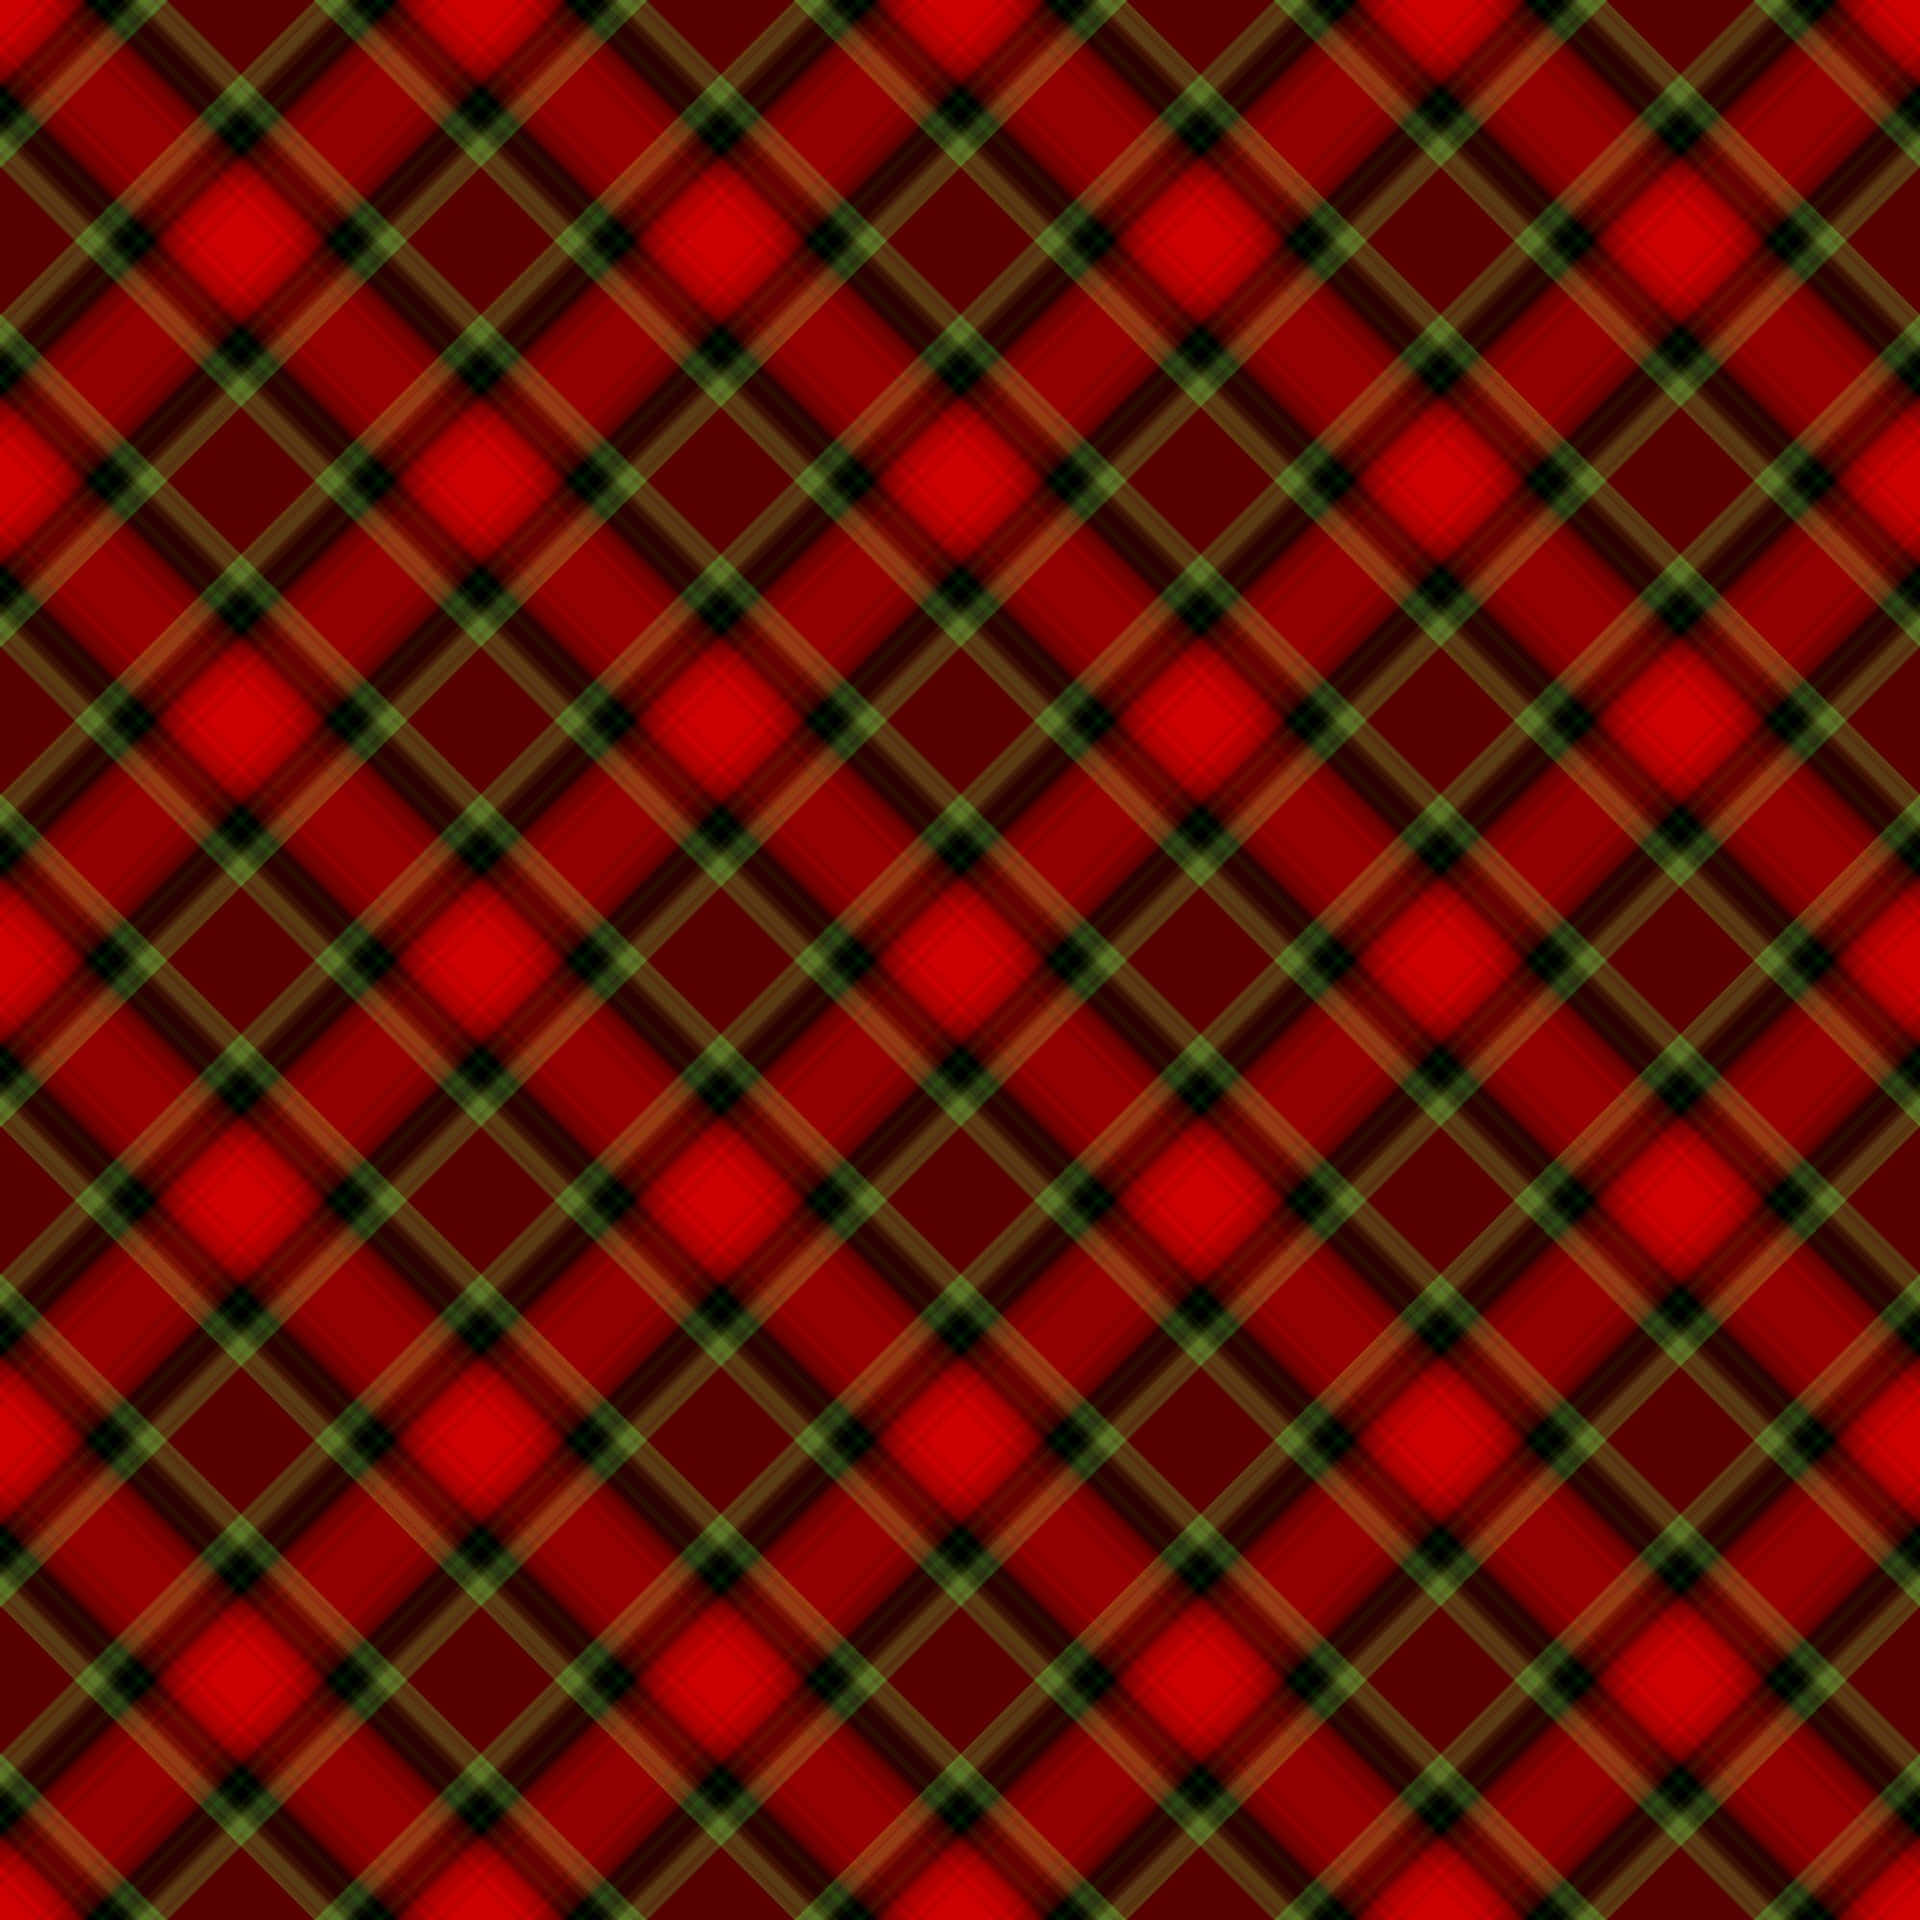 A Red And Brown Plaid Fabric